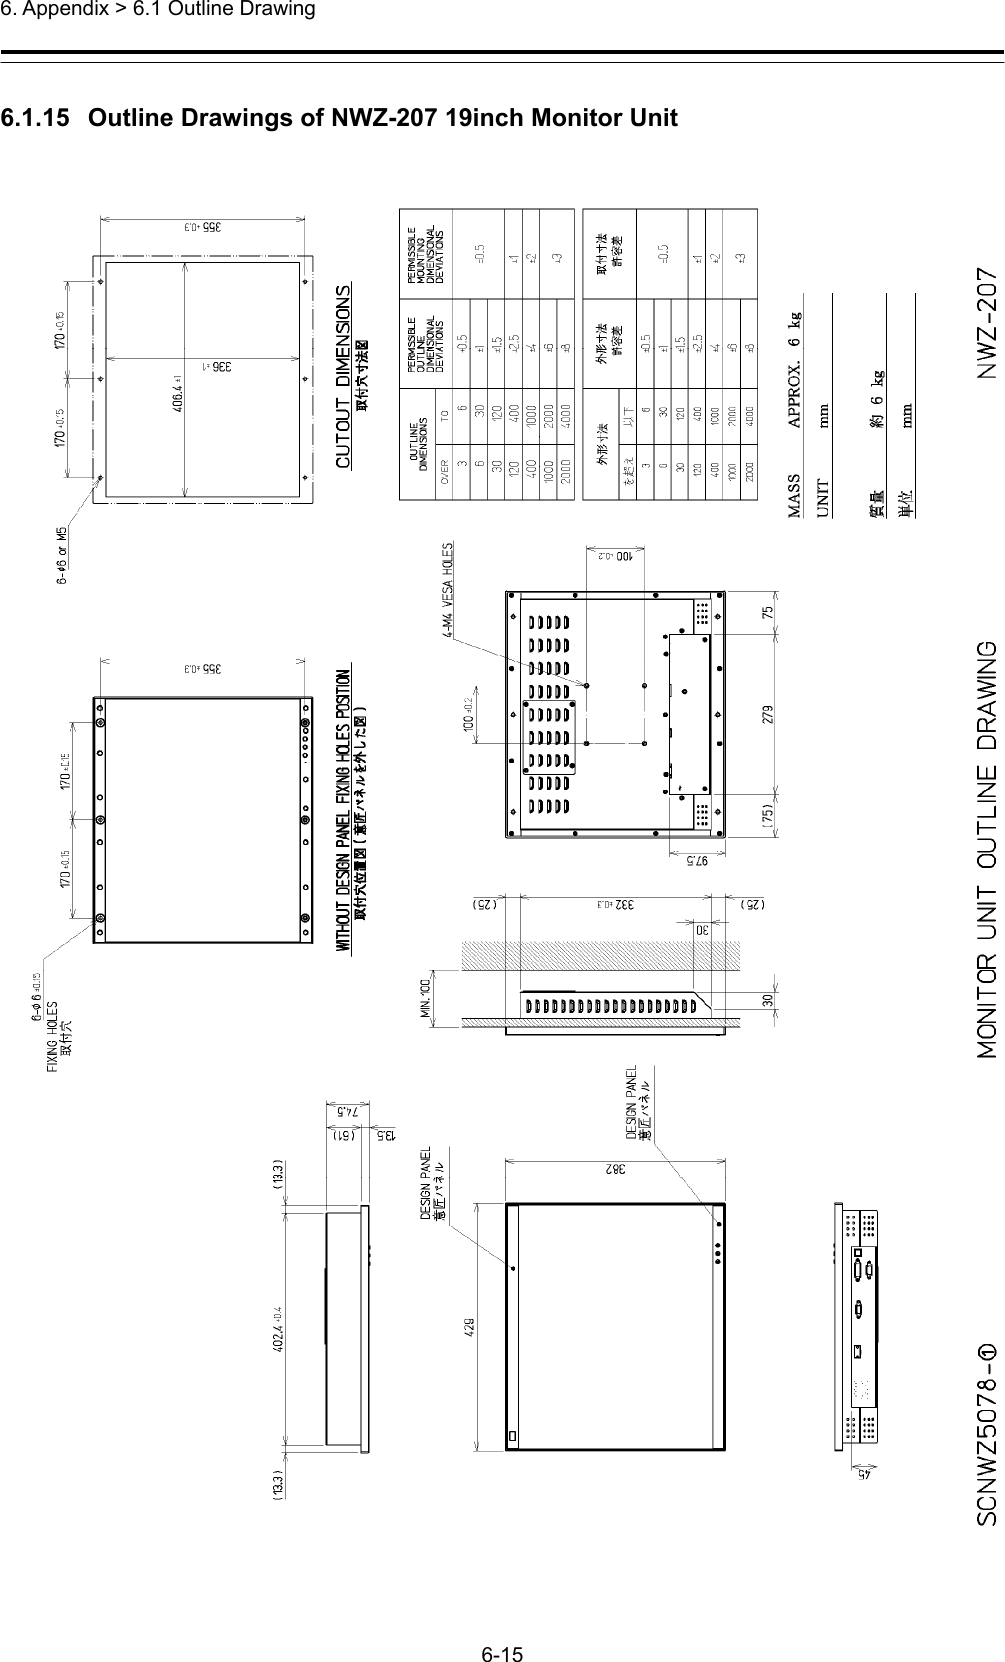  6. Appendix &gt; 6.1 Outline Drawing 6-15  6.1.15   Outline Drawings of NWZ-207 19inch Monitor Unit  